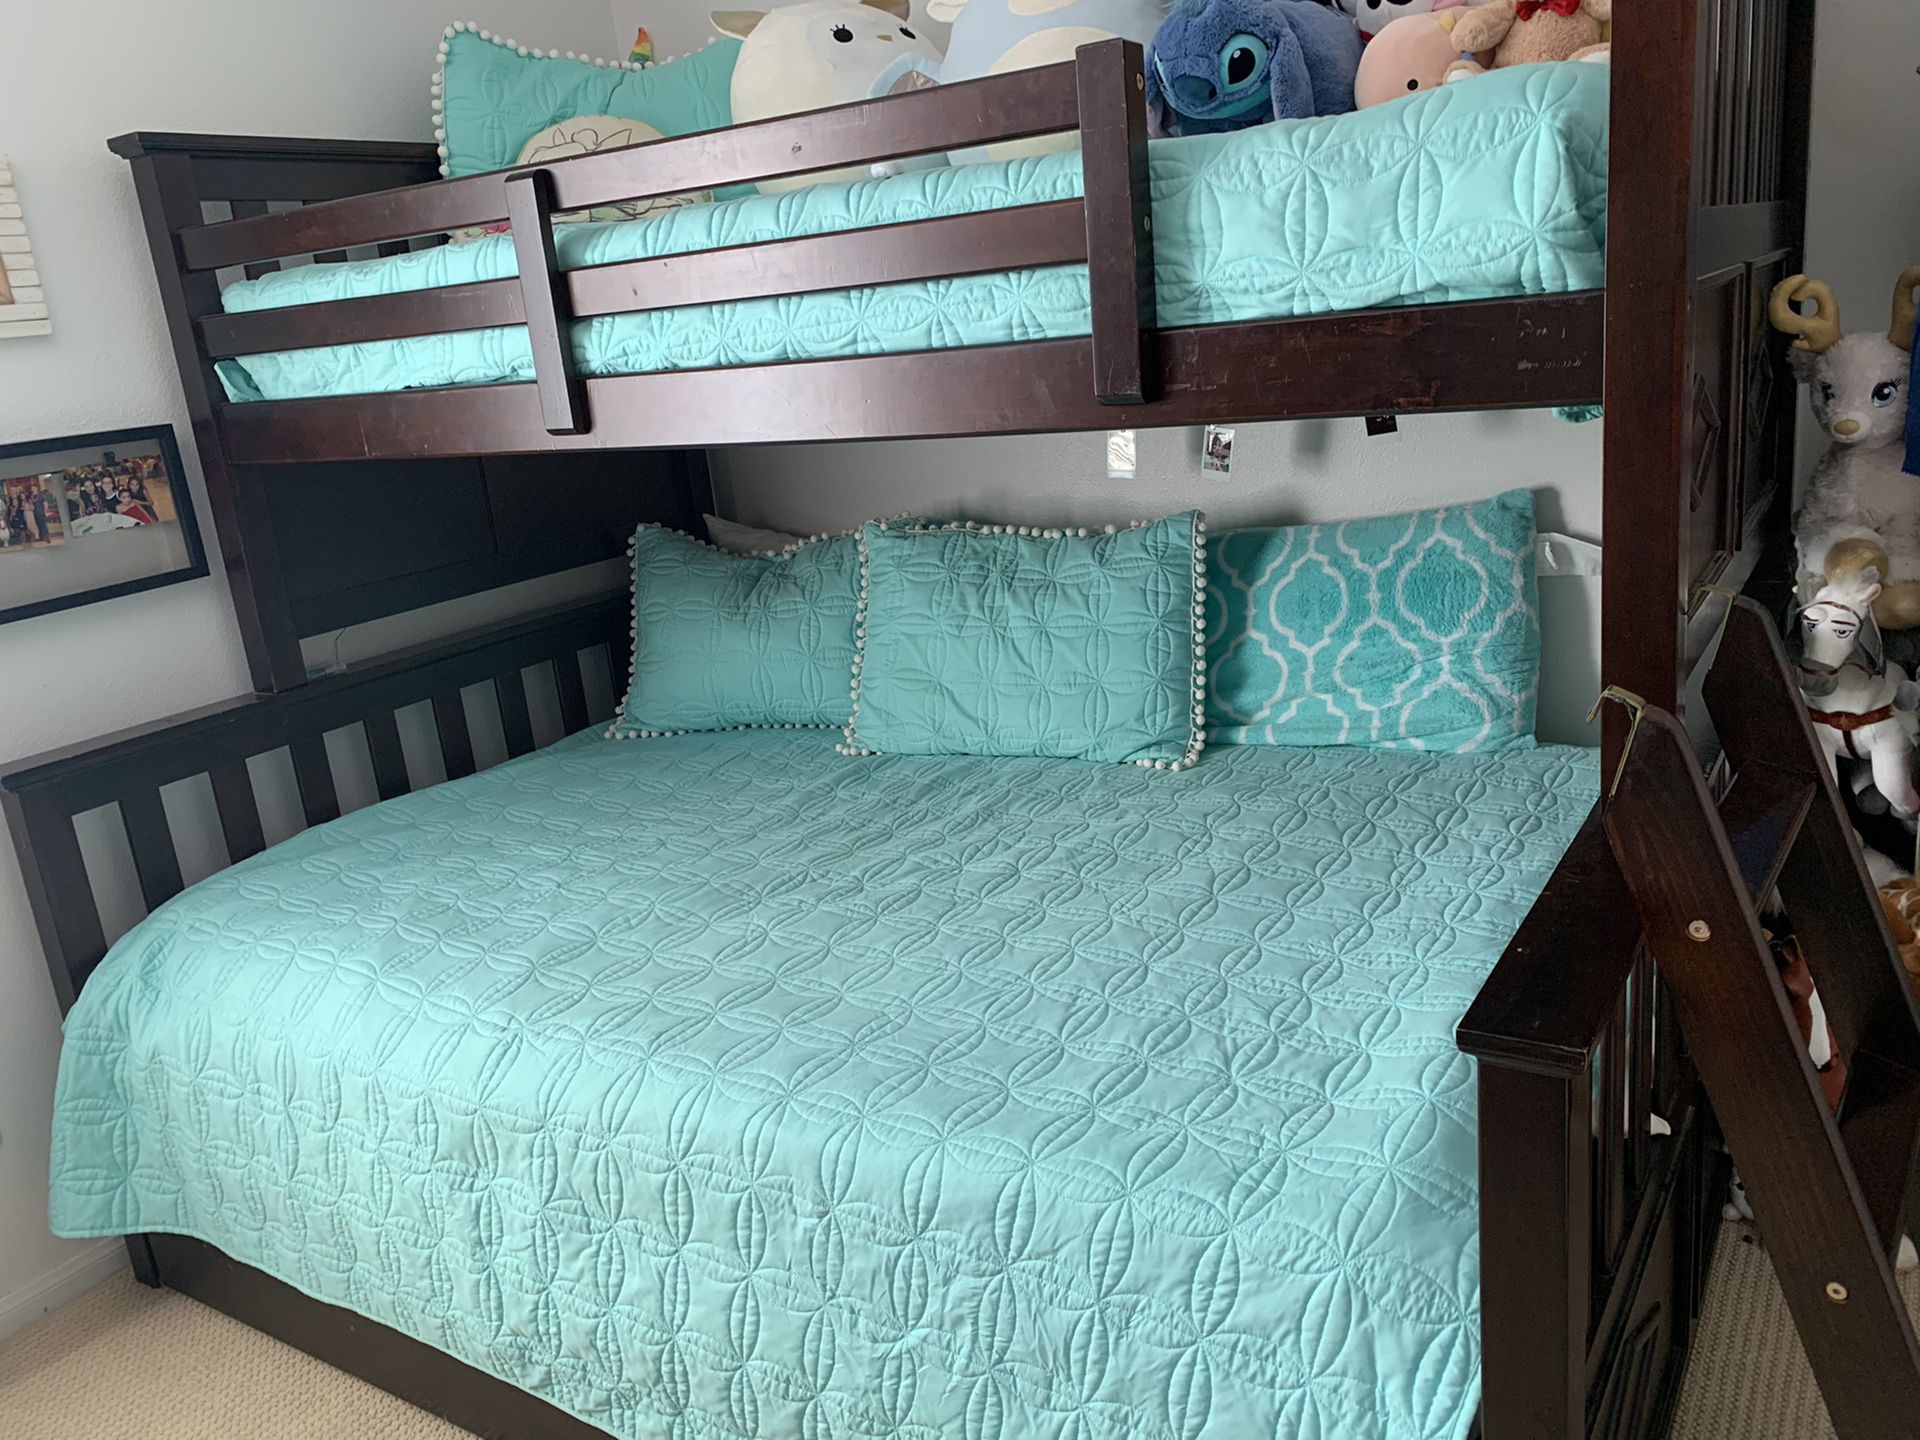 Bunk Bed with drawer/trundle underneath